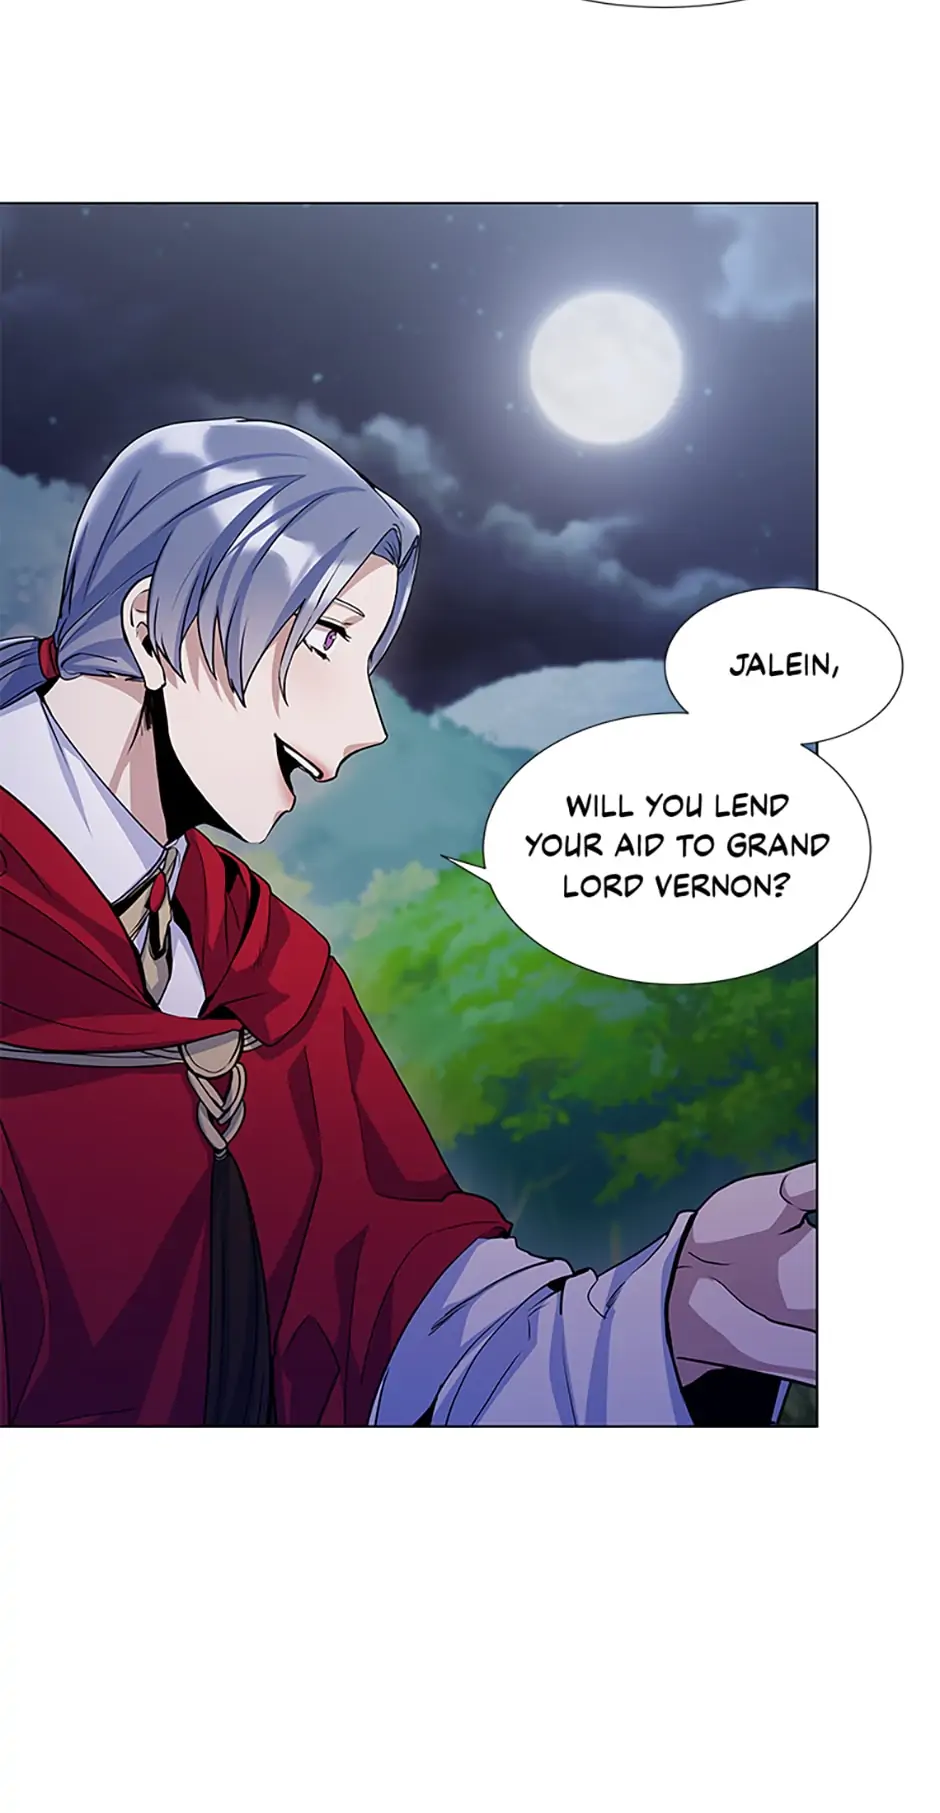 The Imperious Young Lord chapter 16